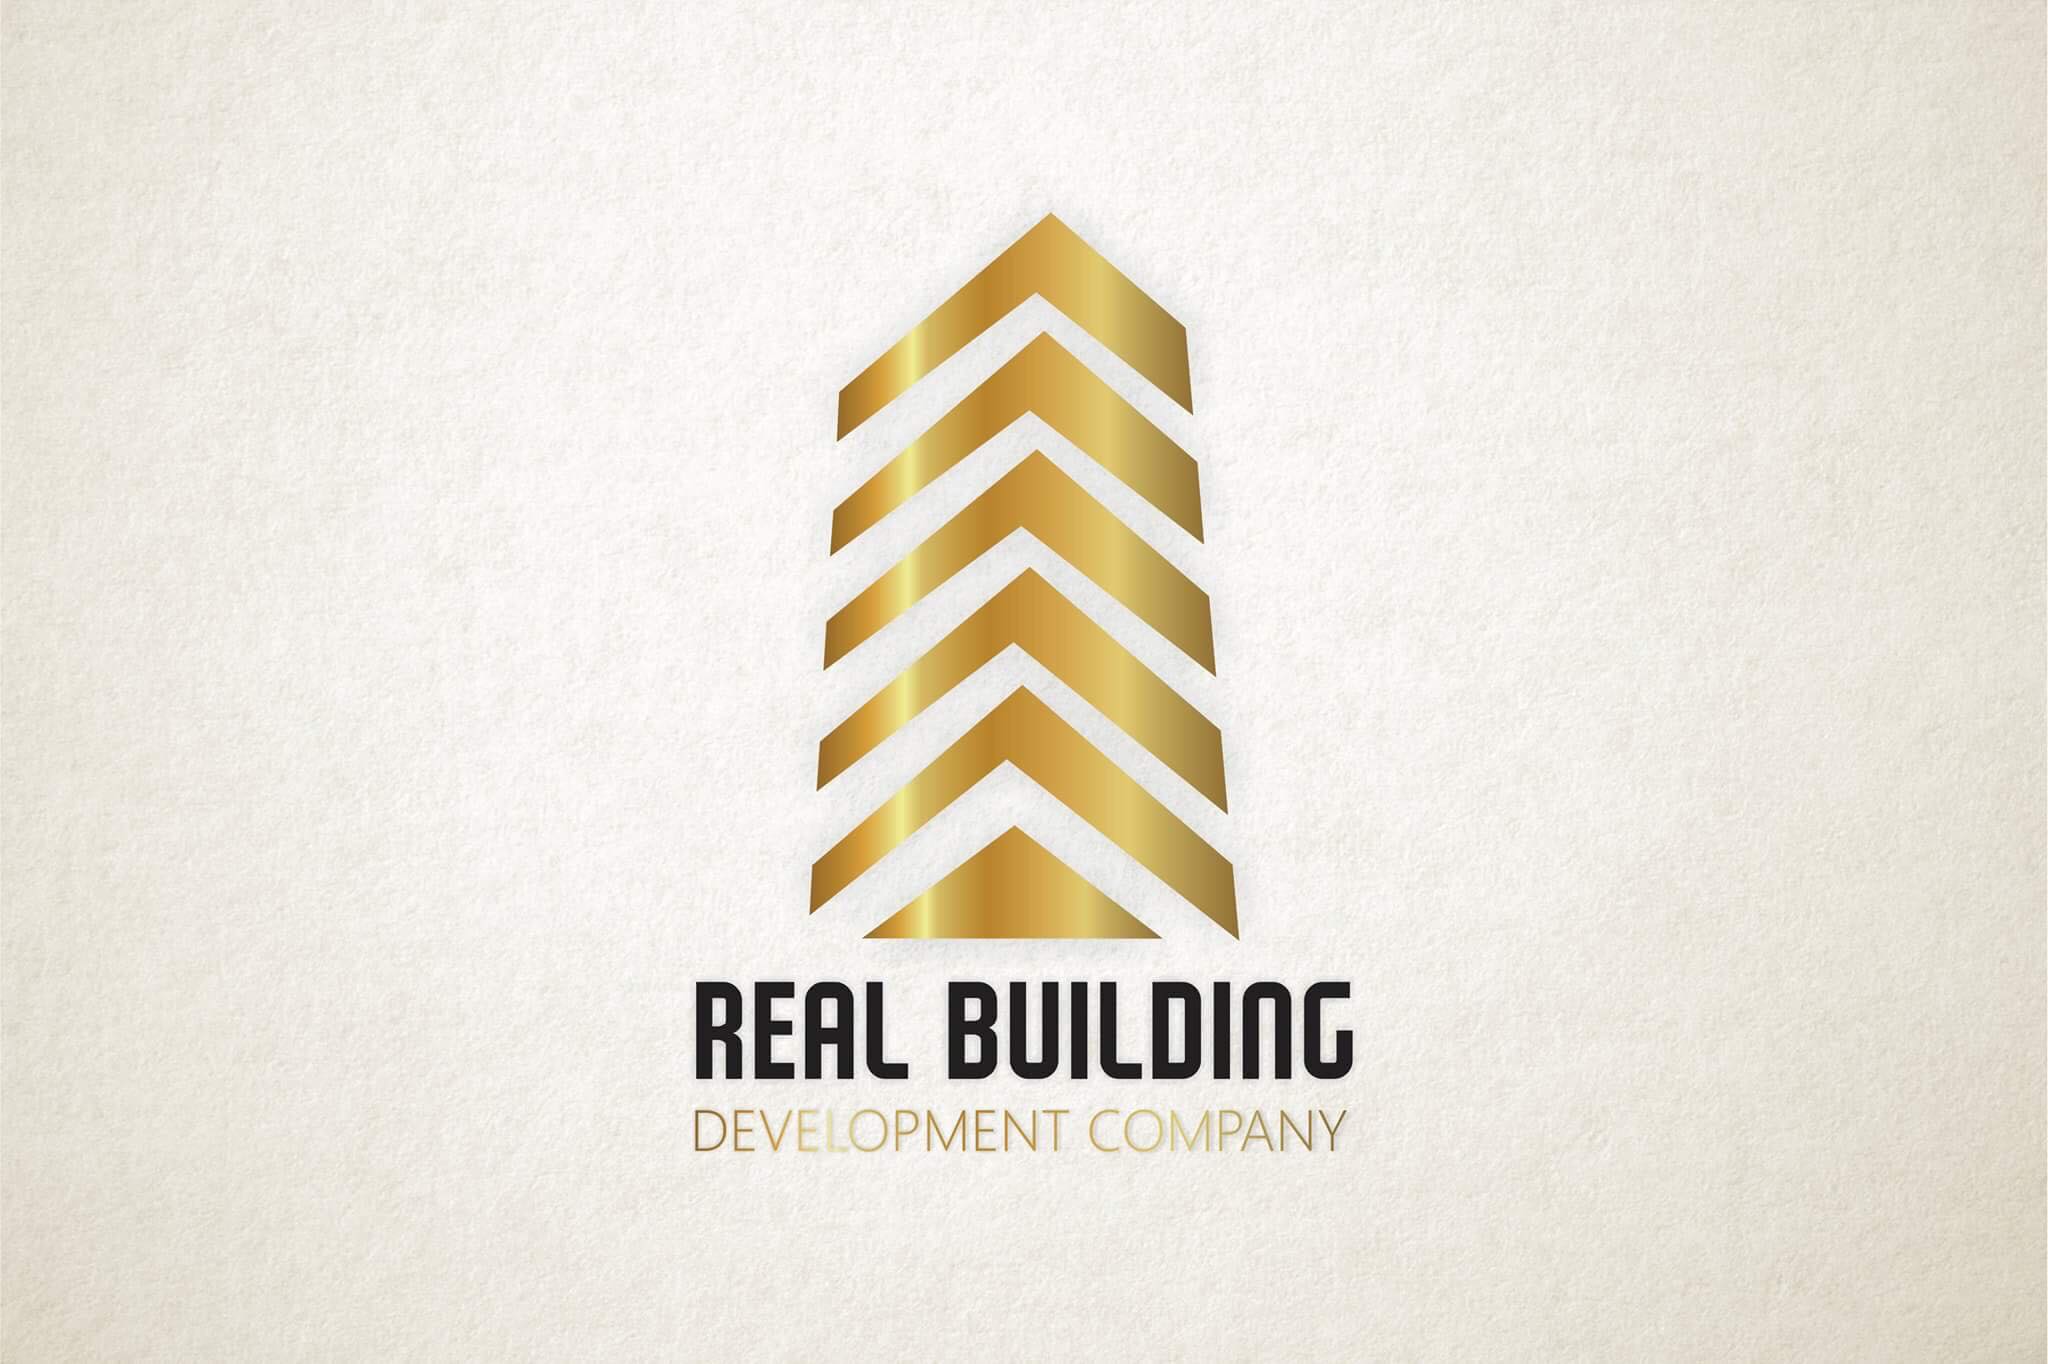 Real Building